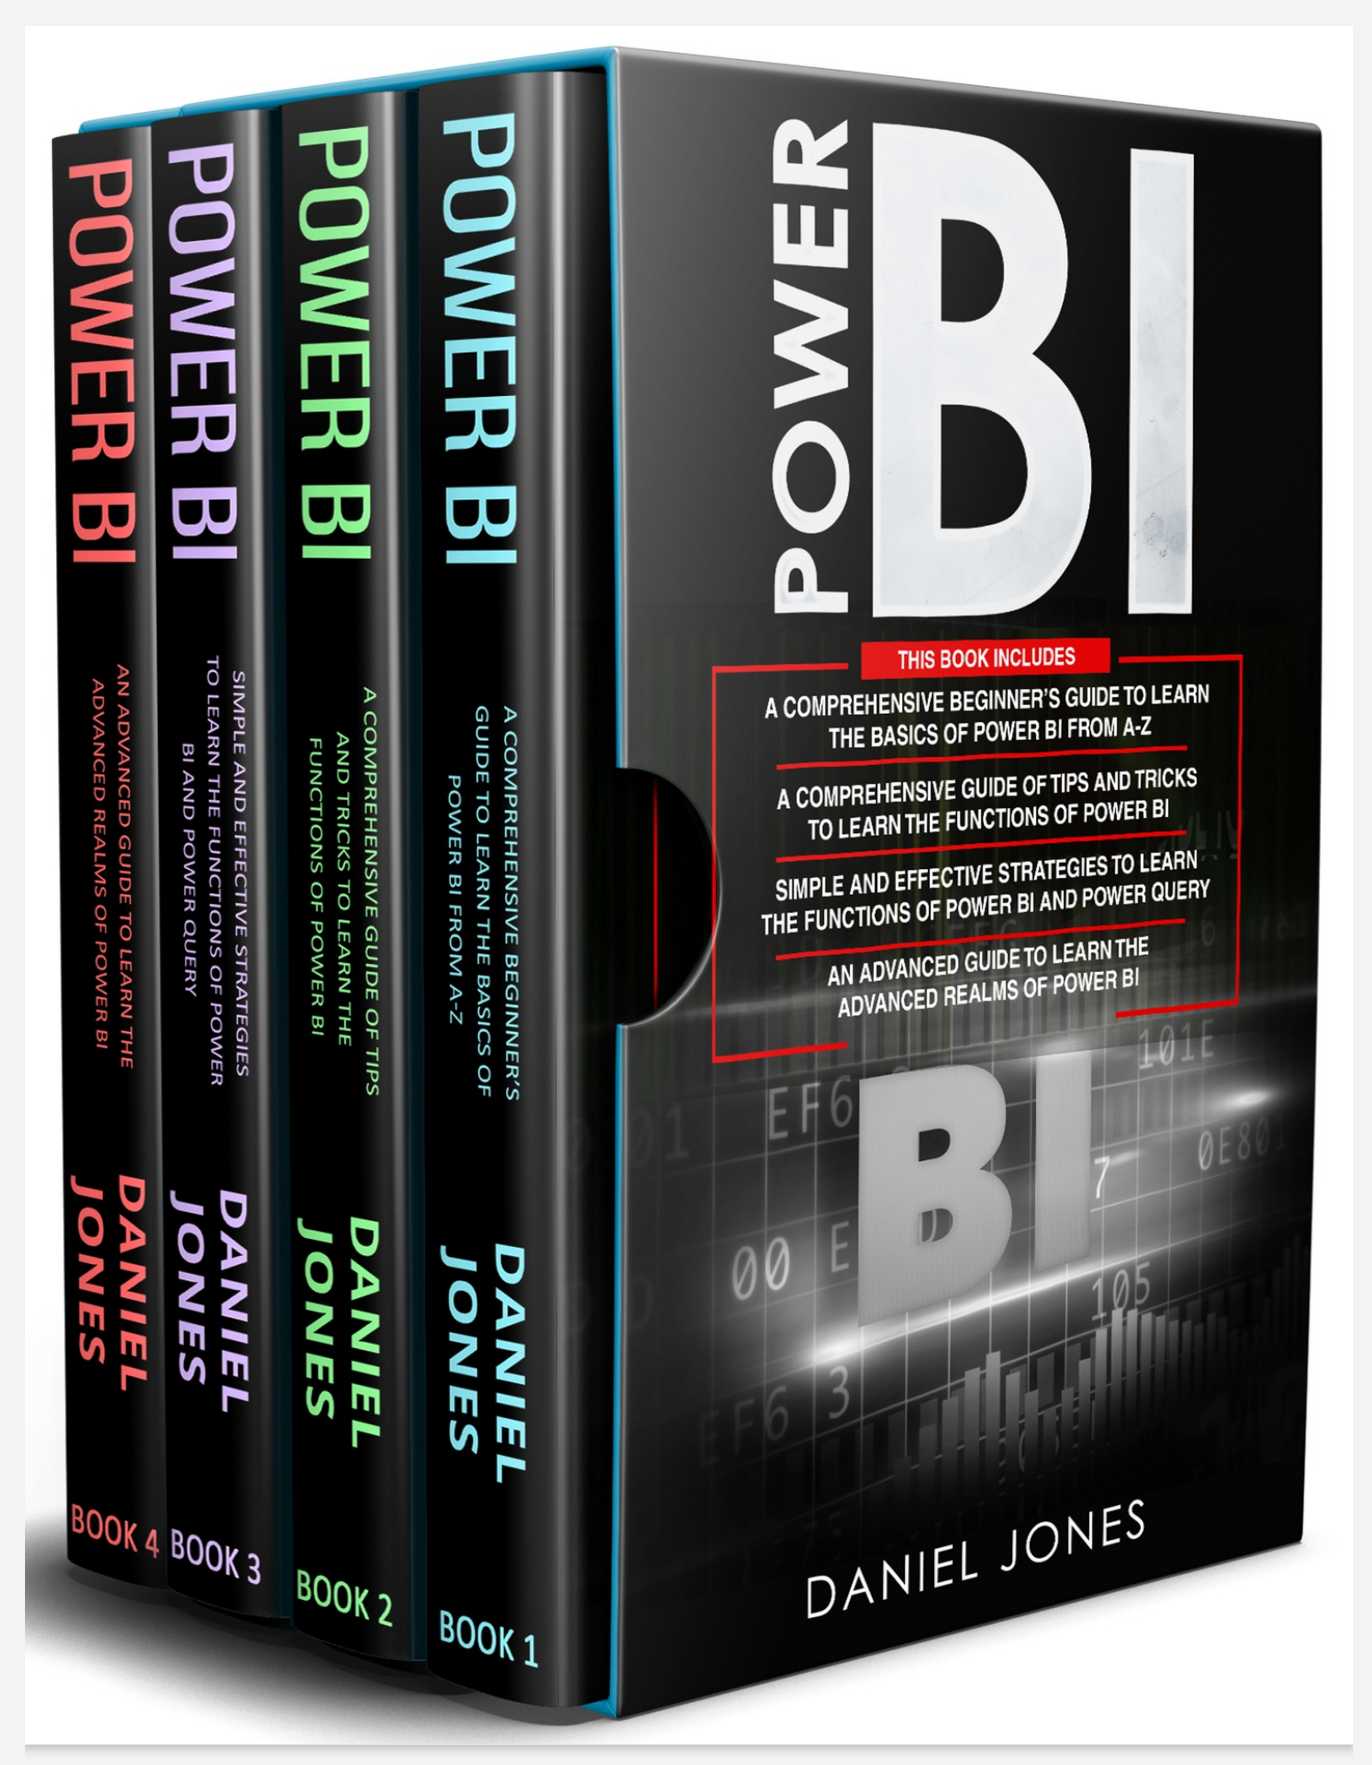 Power BI: 4 in 1- Beginner’s Guide+ Tips and Tricks+ Simple and Effective Strategies to learn Power Bi and Power Query+ An Advanced Guide to Learn the Advanced Realms of Power BI